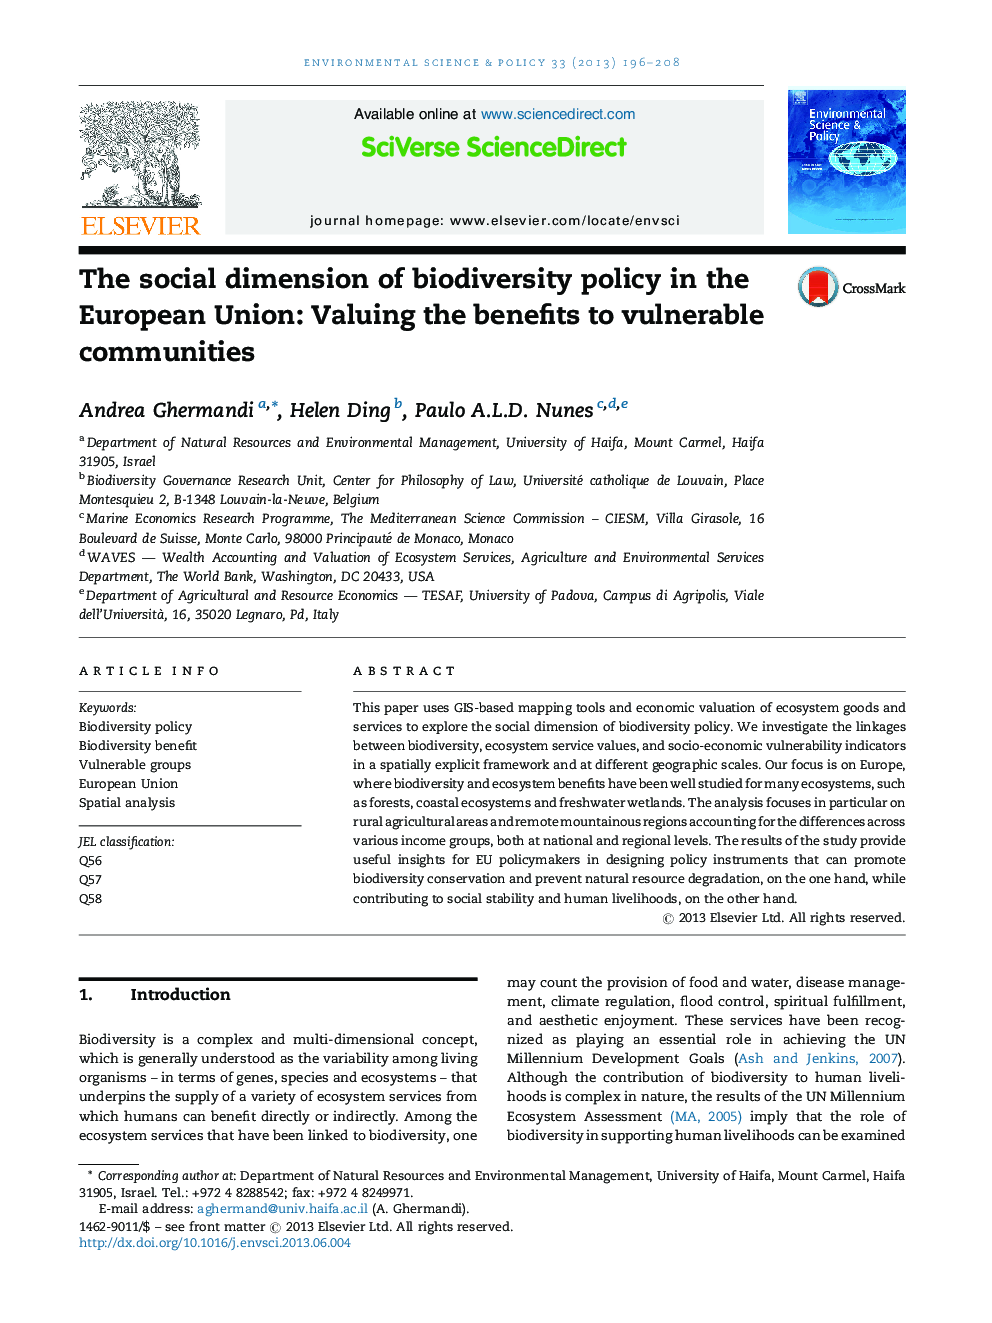 The social dimension of biodiversity policy in the European Union: Valuing the benefits to vulnerable communities